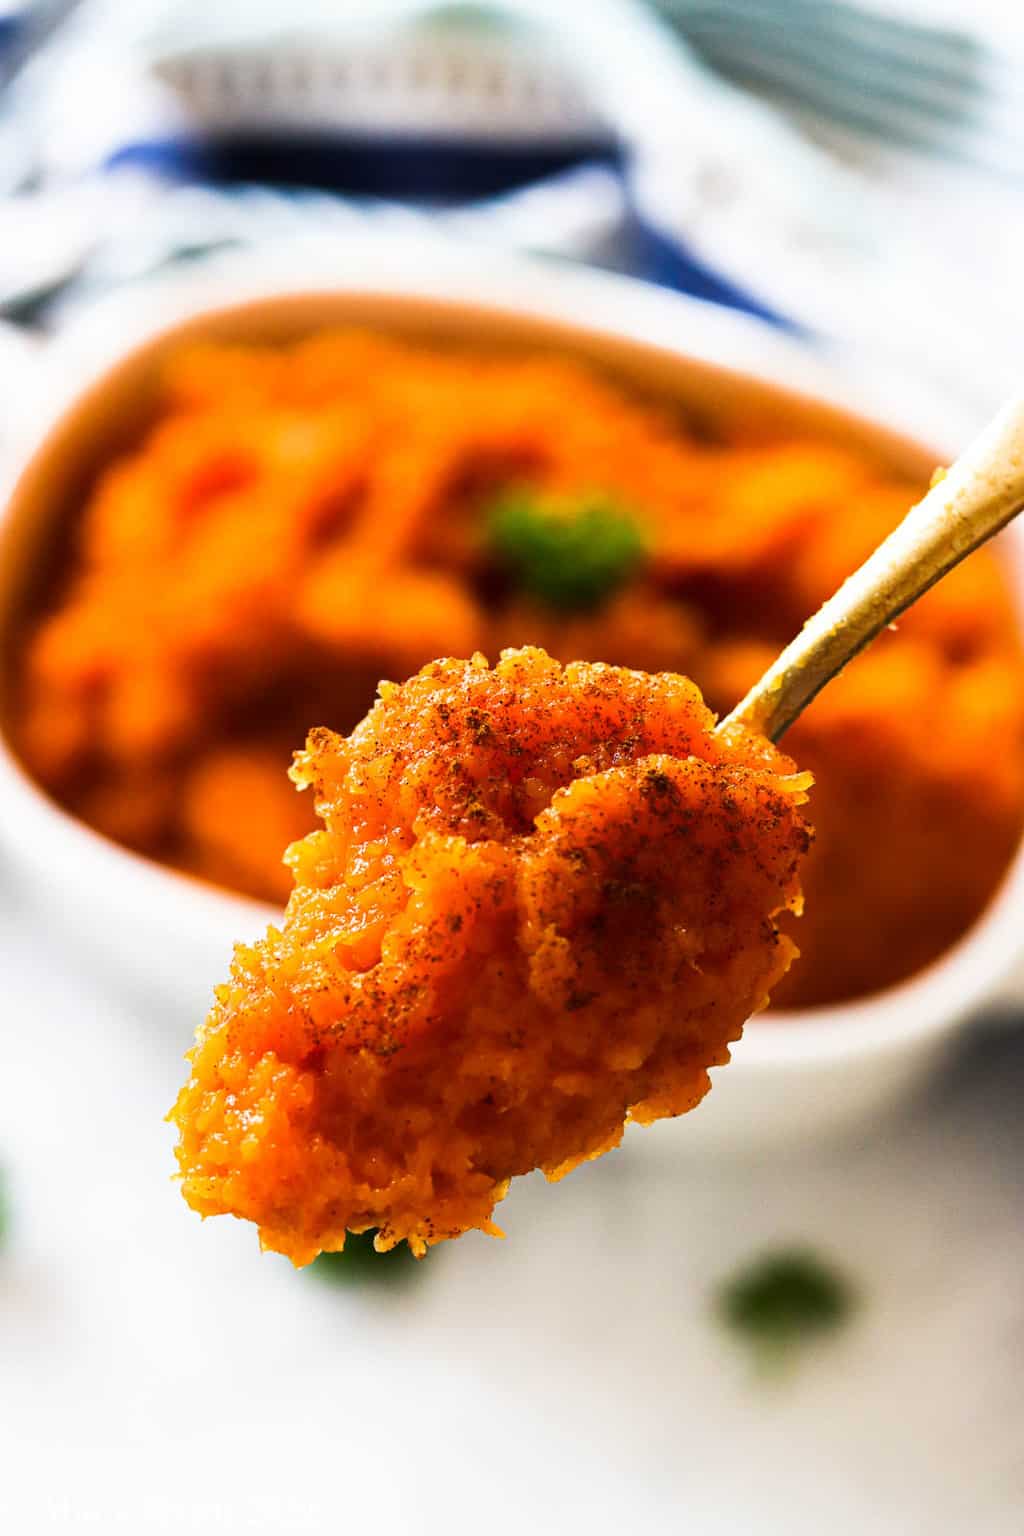 An up-close shot of a serving spoon of mashed butternut squash